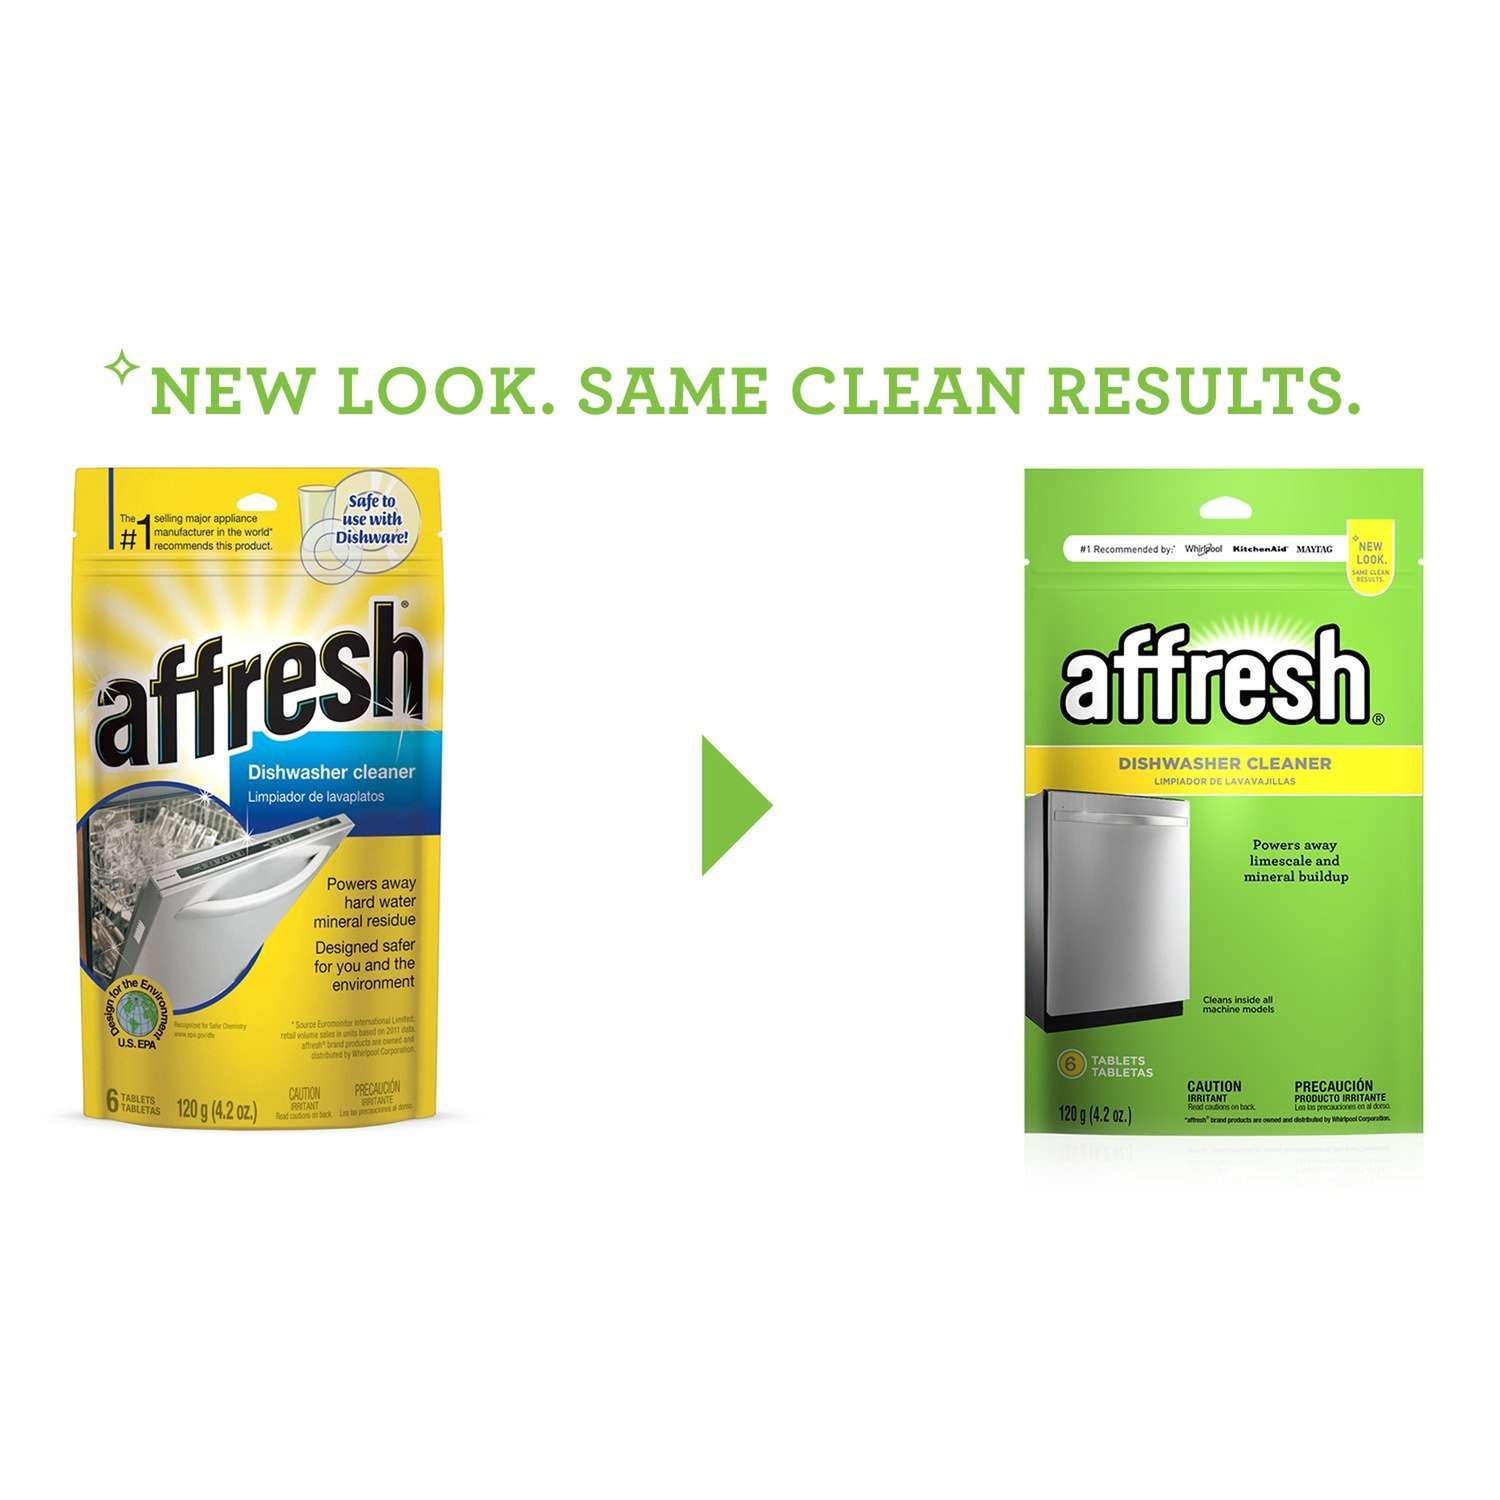 Whirlpool Affresh Washer Machine Cleaner, Tablets - 6 count, 8.4 oz box